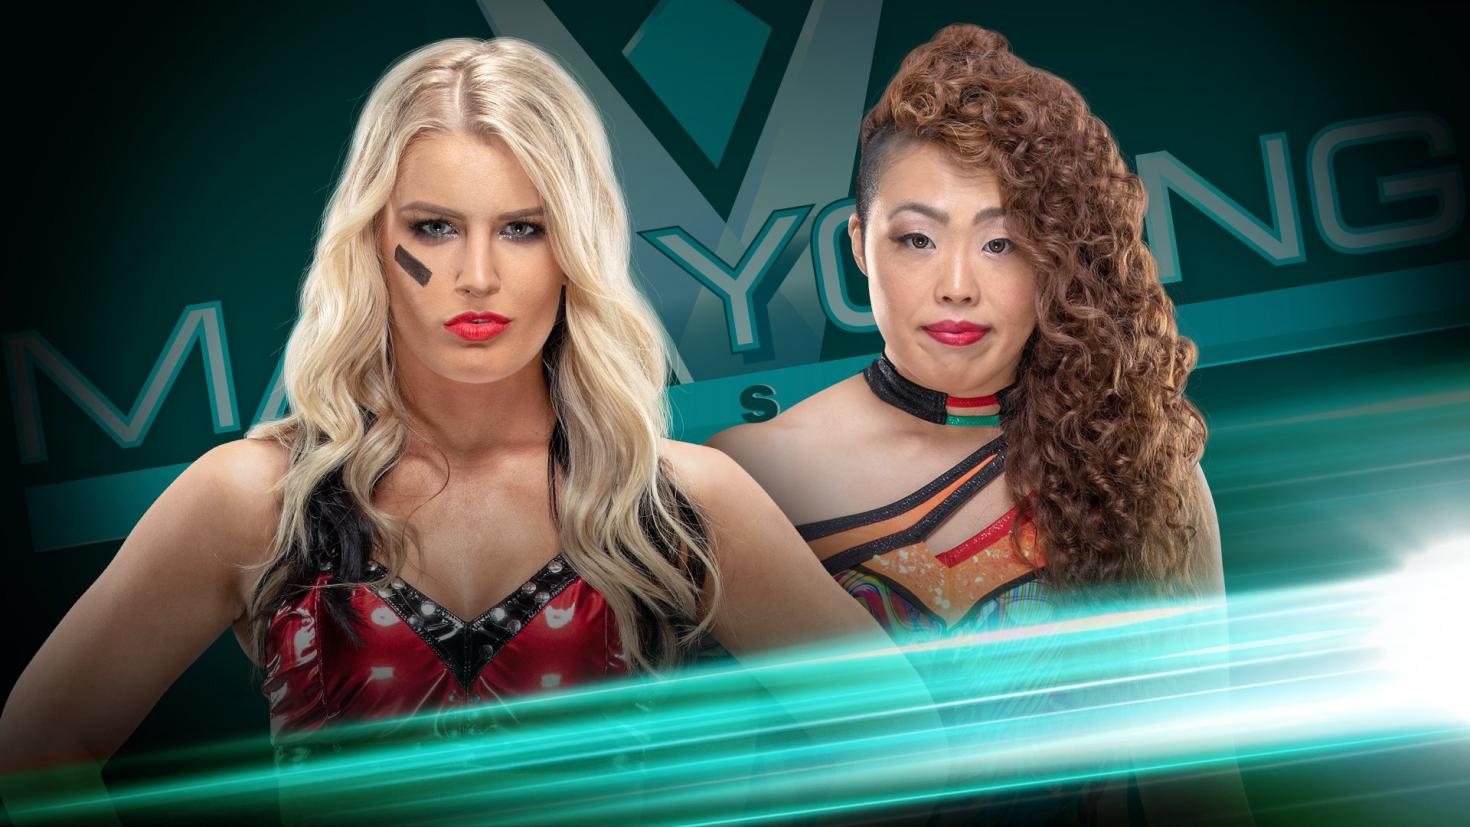 Matches for Tonights 205 Live, NXT, and Mae Young Classic 